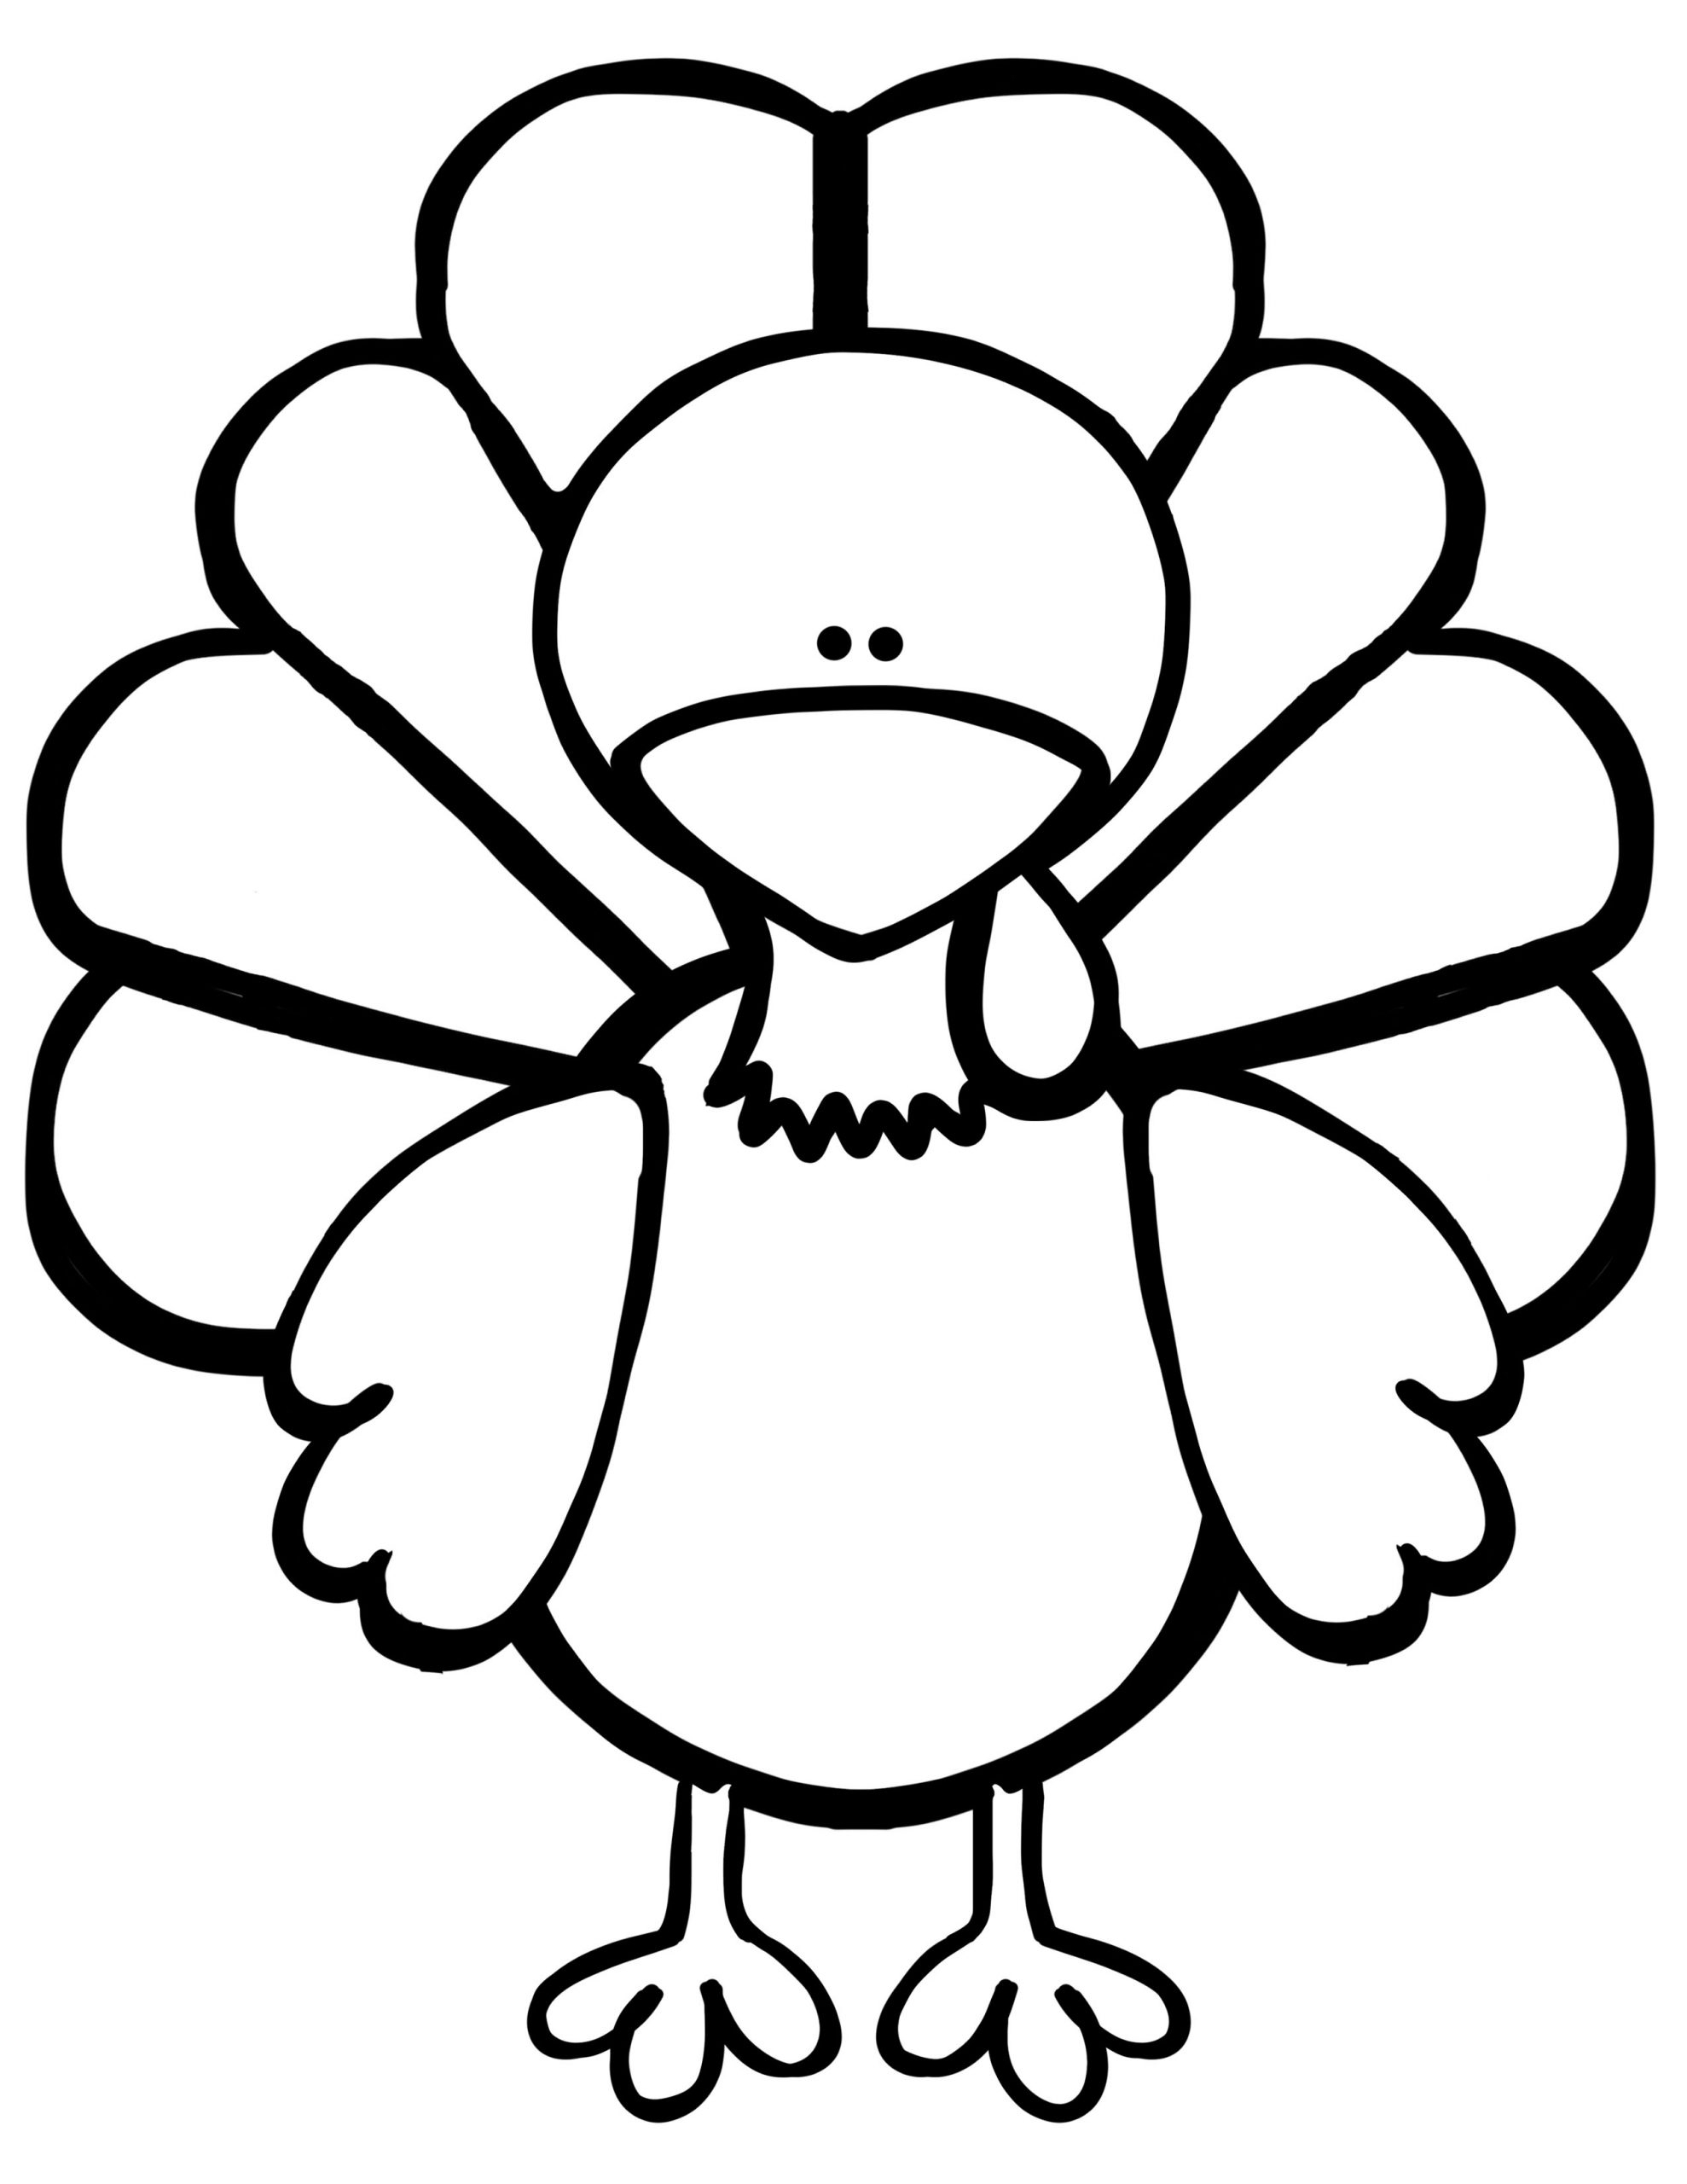 The Turkey Disguise Project For Kids - Blank Turkey Templates | How To with Blank Turkey Template